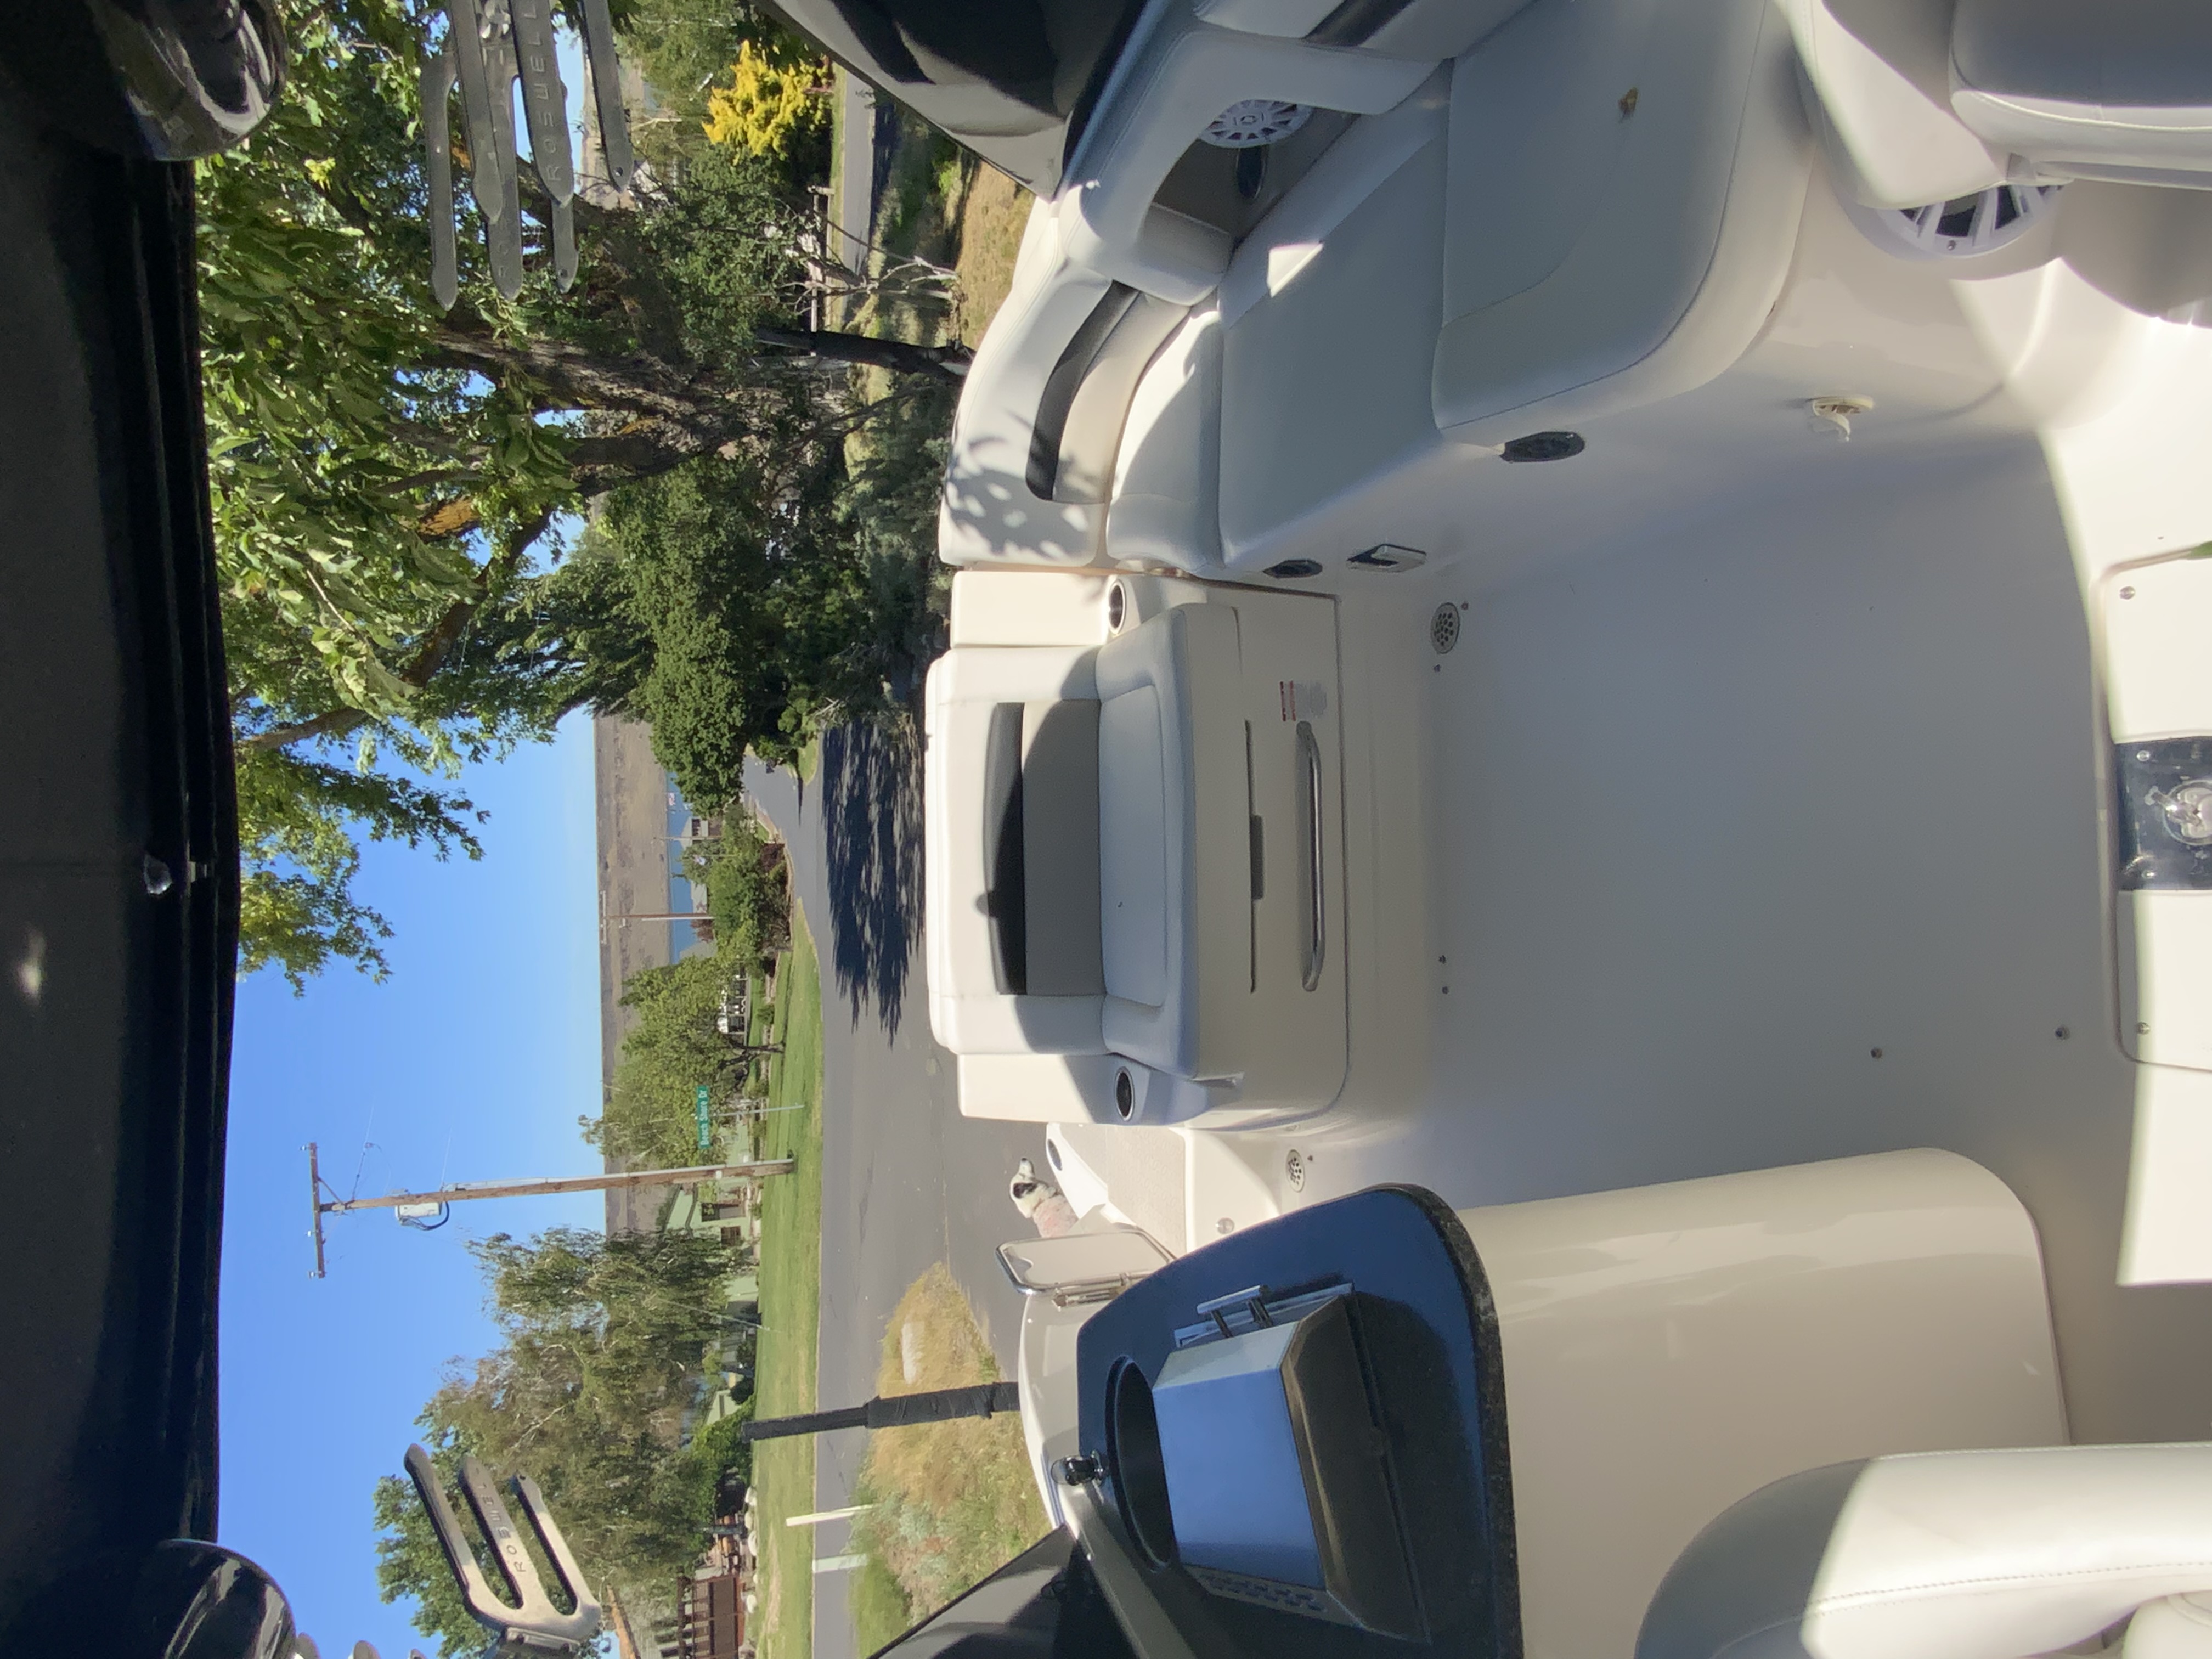 2008 Chaparral 264 Sunesta Power boat for sale in Hermiston, OR - image 2 